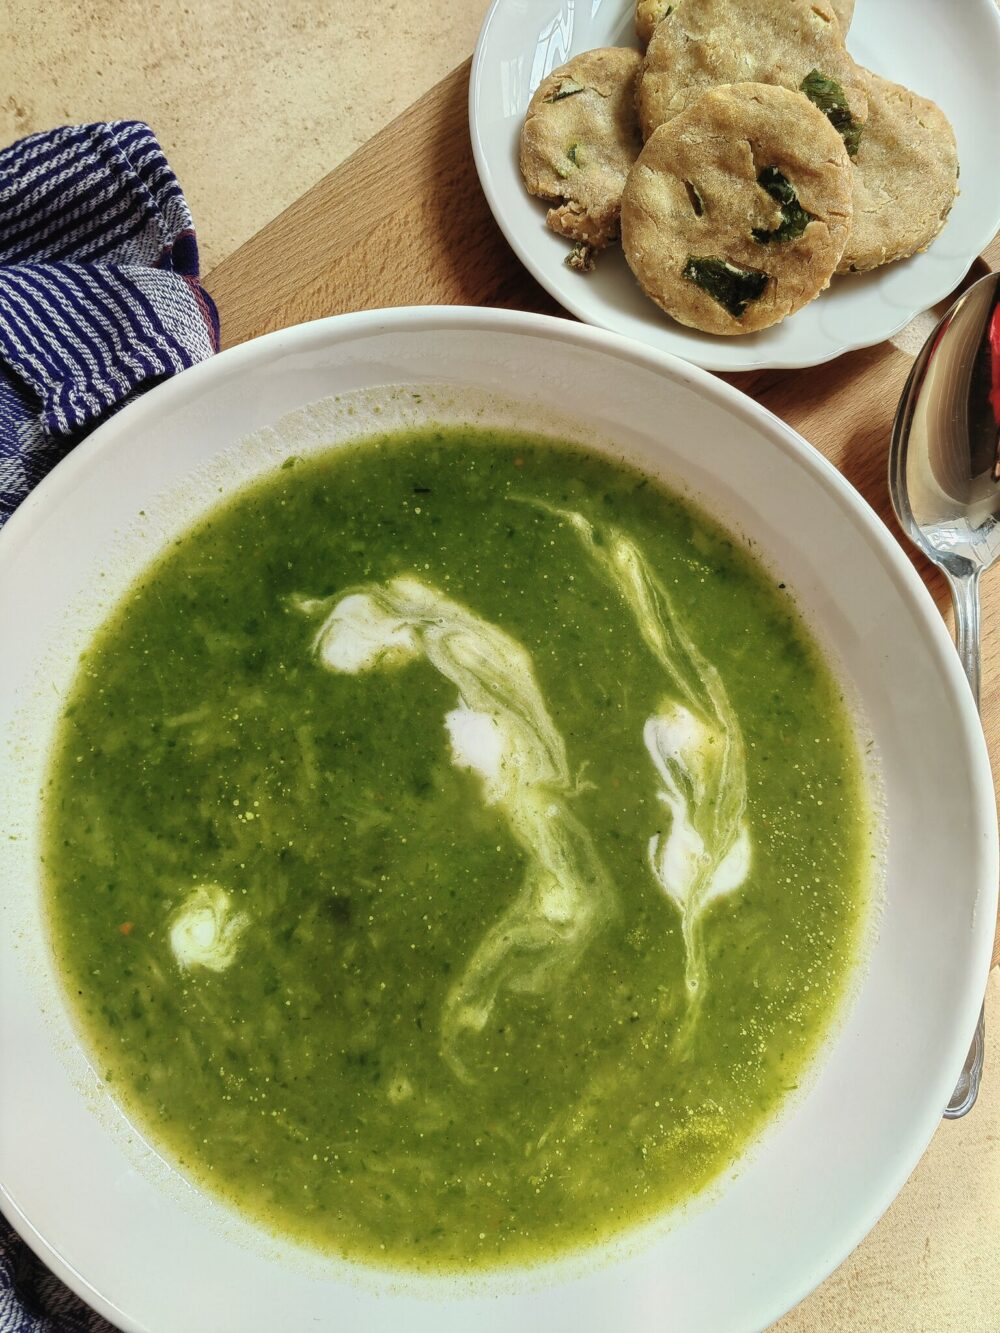 creamy green wild garlic soup in a white bowl on a wooden table with some crackers on the side.